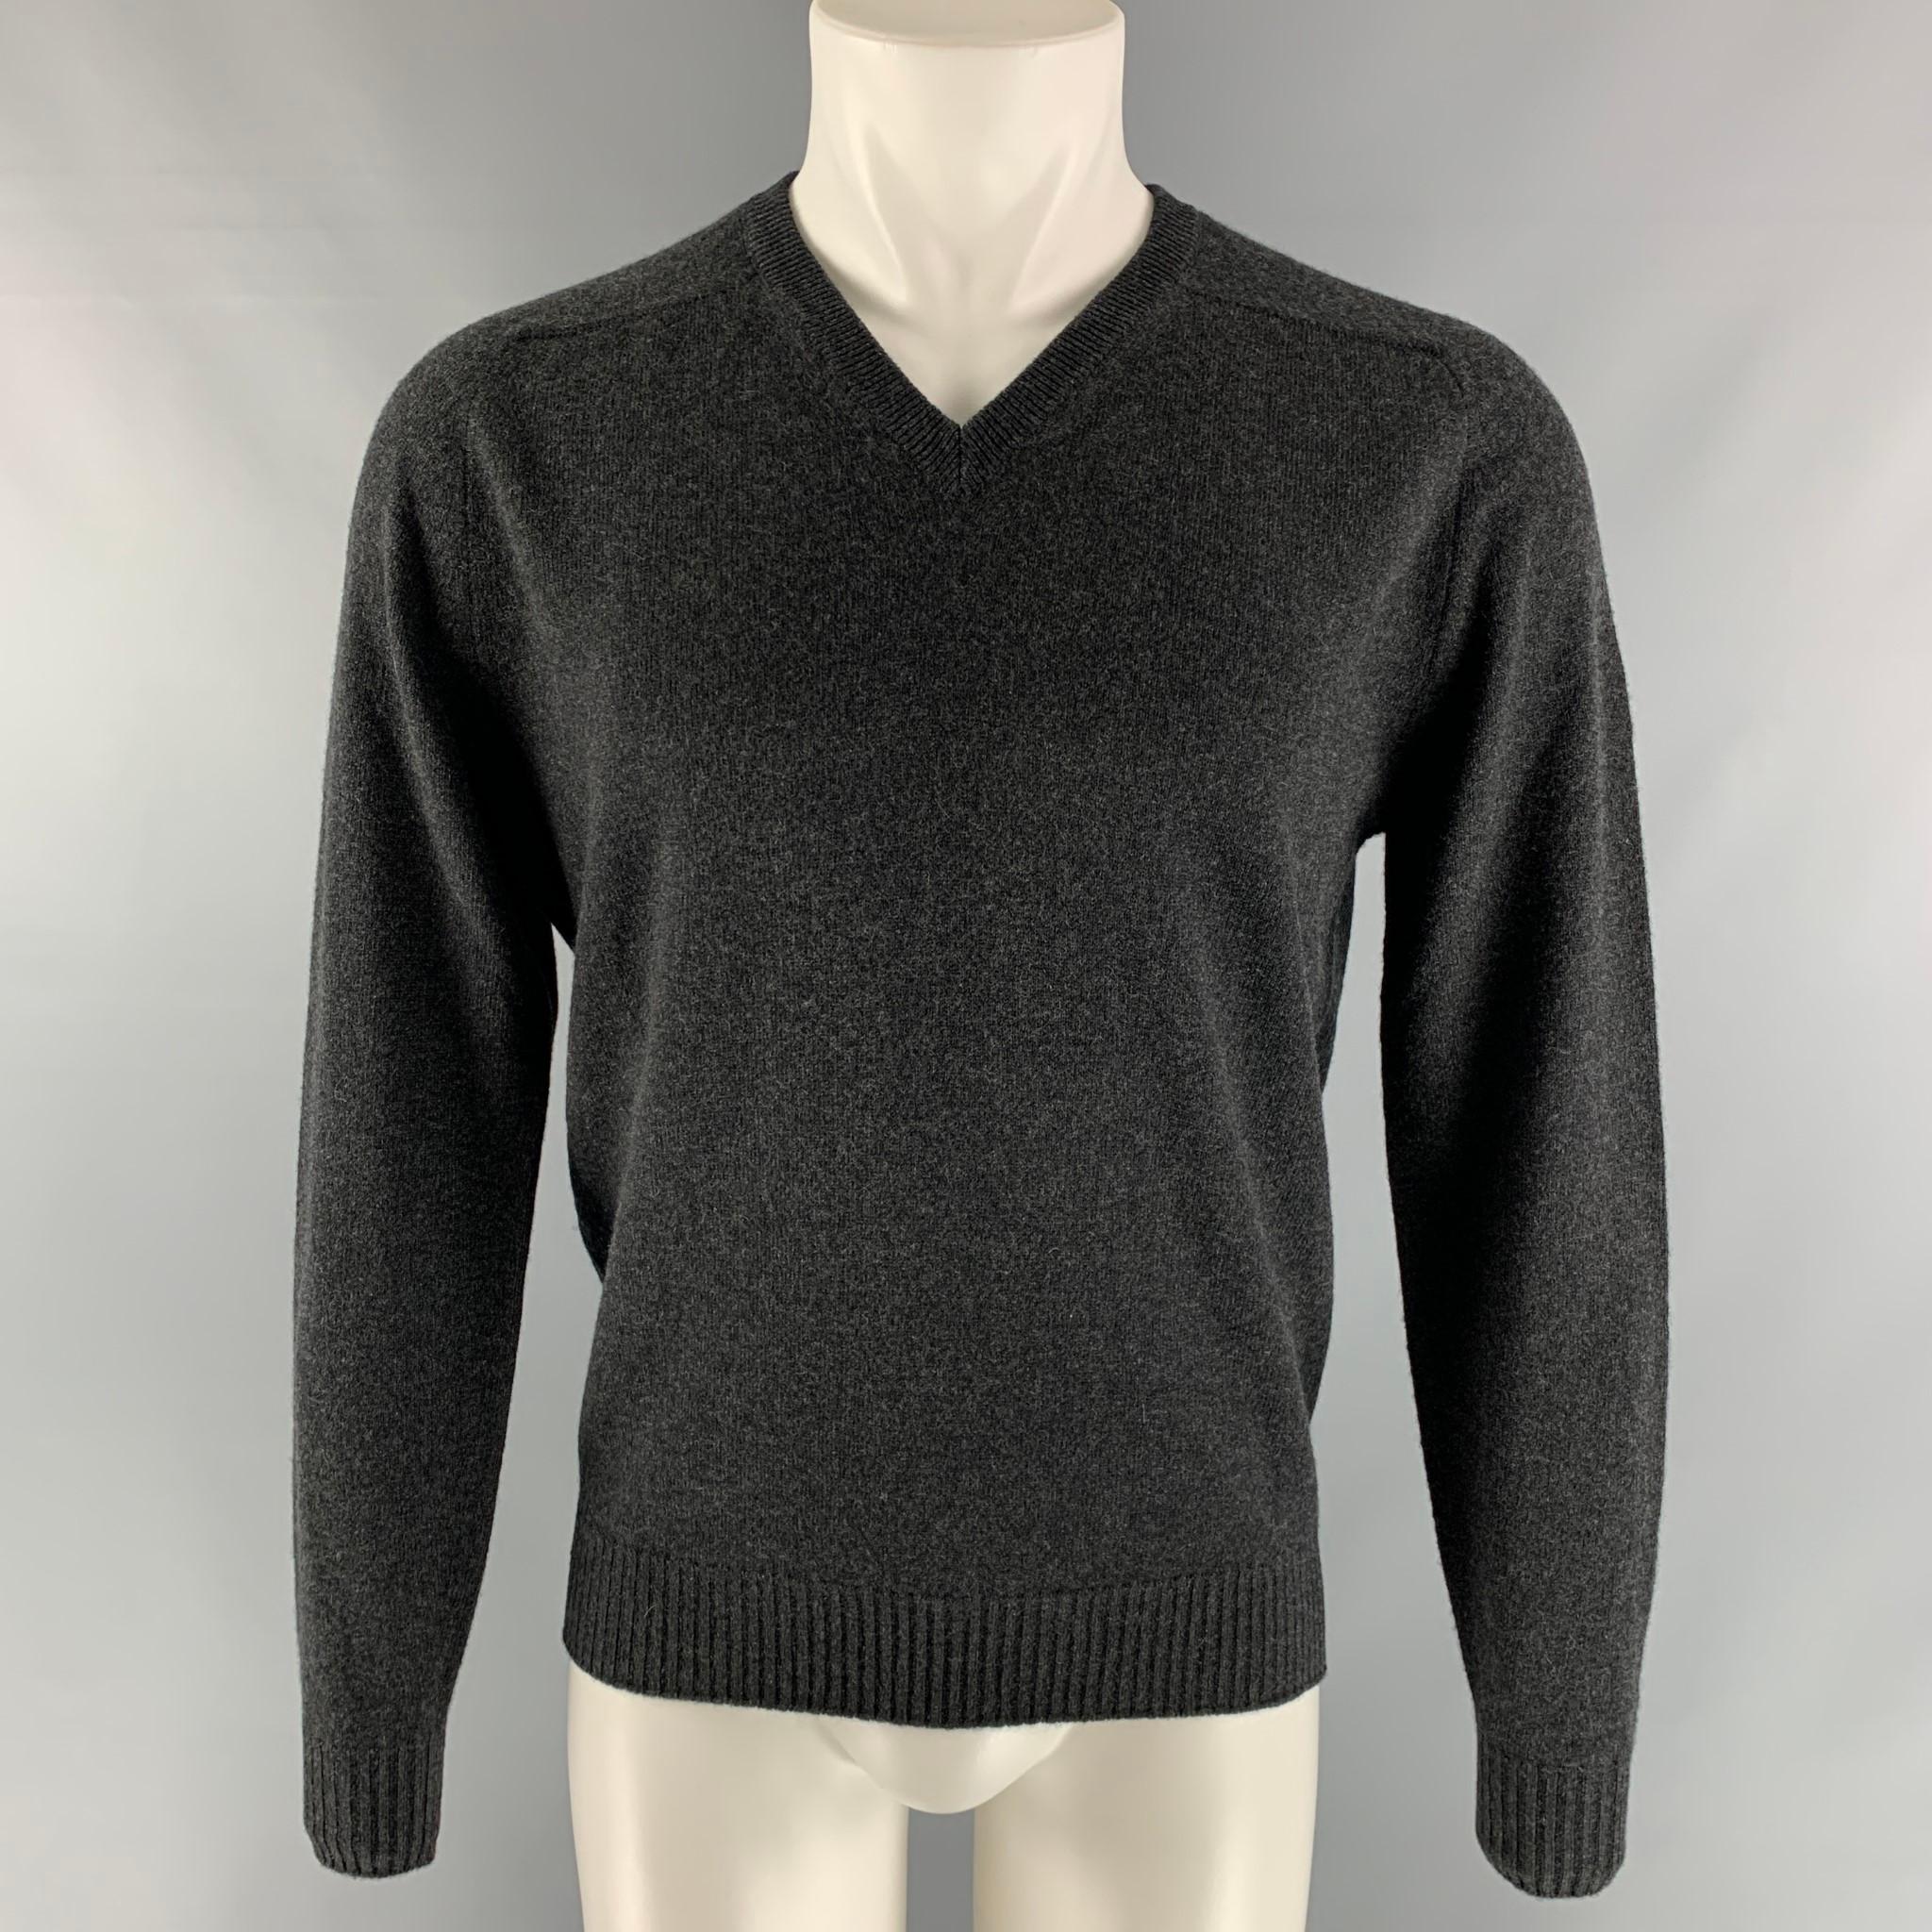 BROOKS BROTHERS long sleeve, V-neck sweater comes in charcoal knitted cashmere. Made in Italy.

New with tags.
Marked: S

Measurements:

Shoulder: 17 in.
Chest: 46 in.
Sleeve: 27 in.
Length: 26 in.   

 

SKU: 113880
Category: Sweater

More